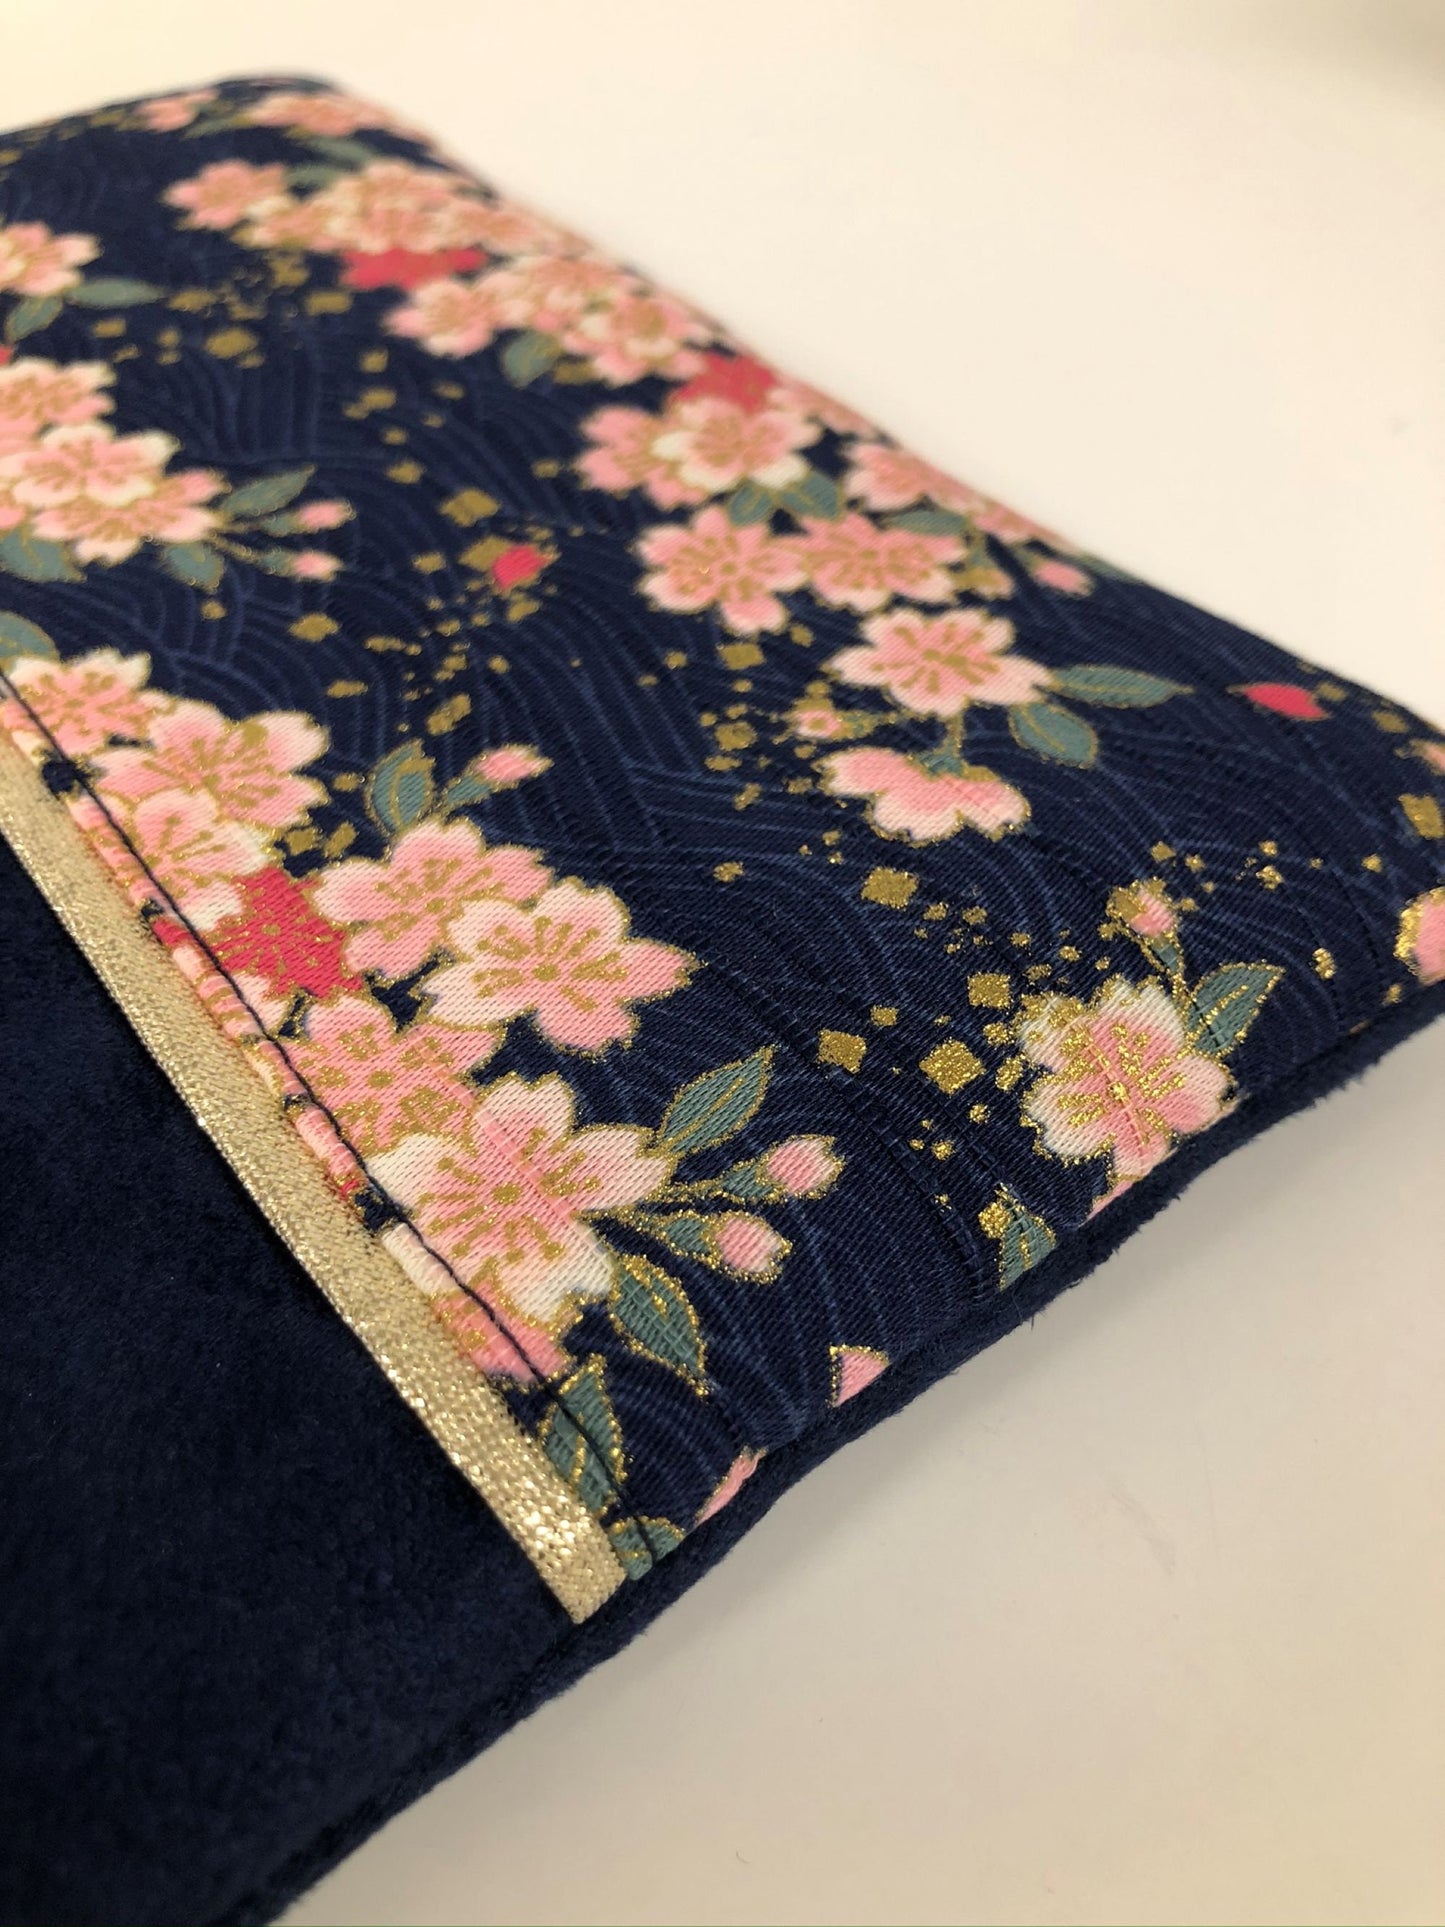 Navy blue and gold purse in Japanese cherry blossom fabric